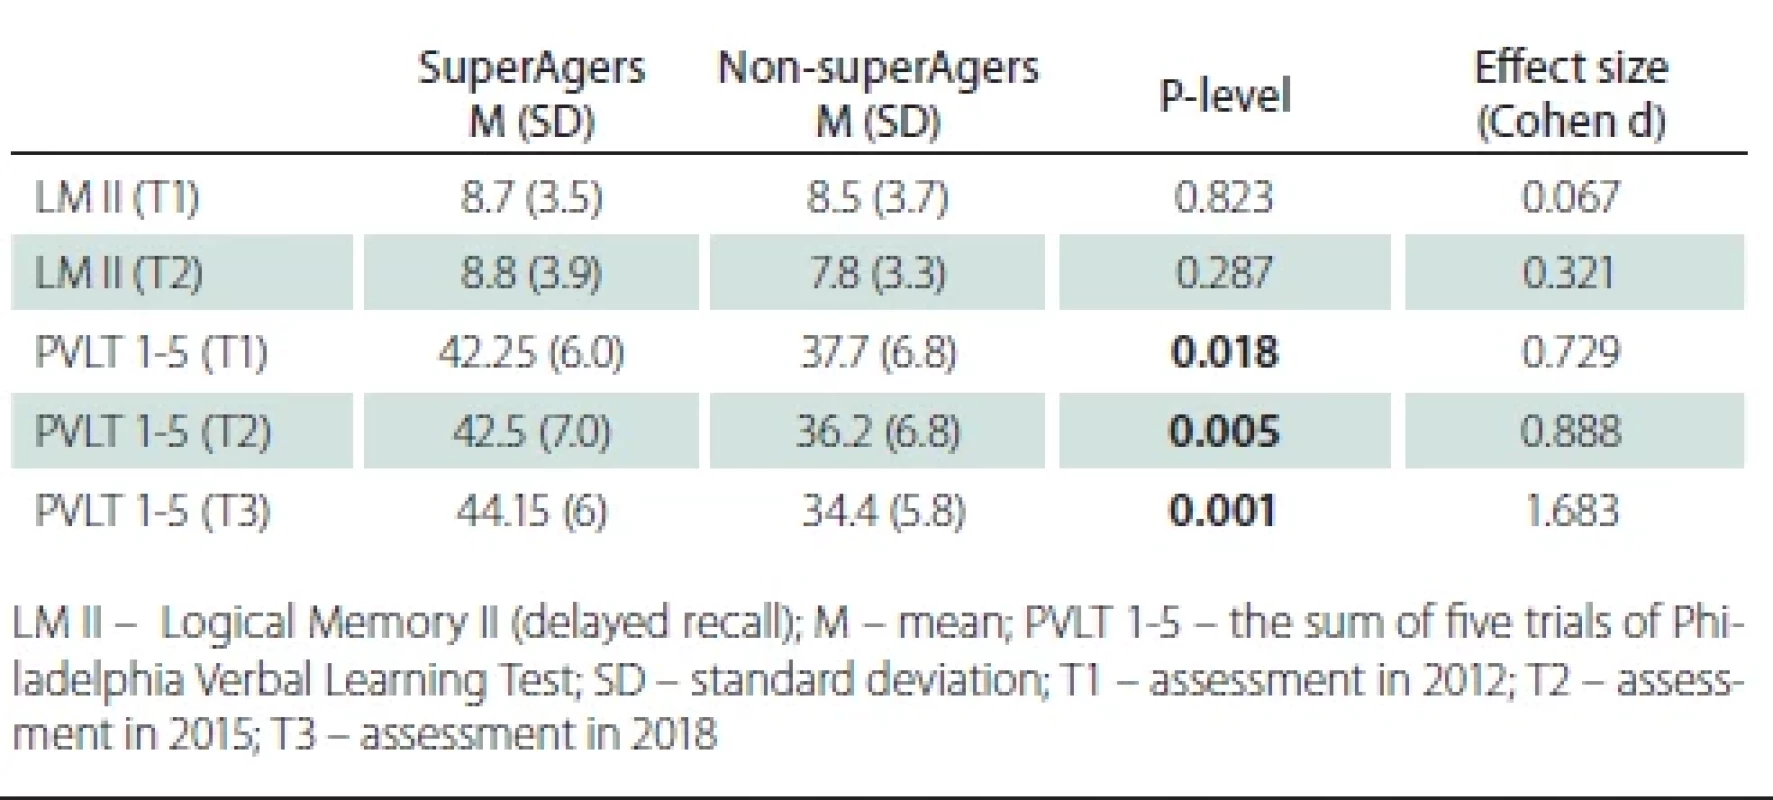 Memory in SuperAgers and non-SuperAgers at T1, T2 and T3.